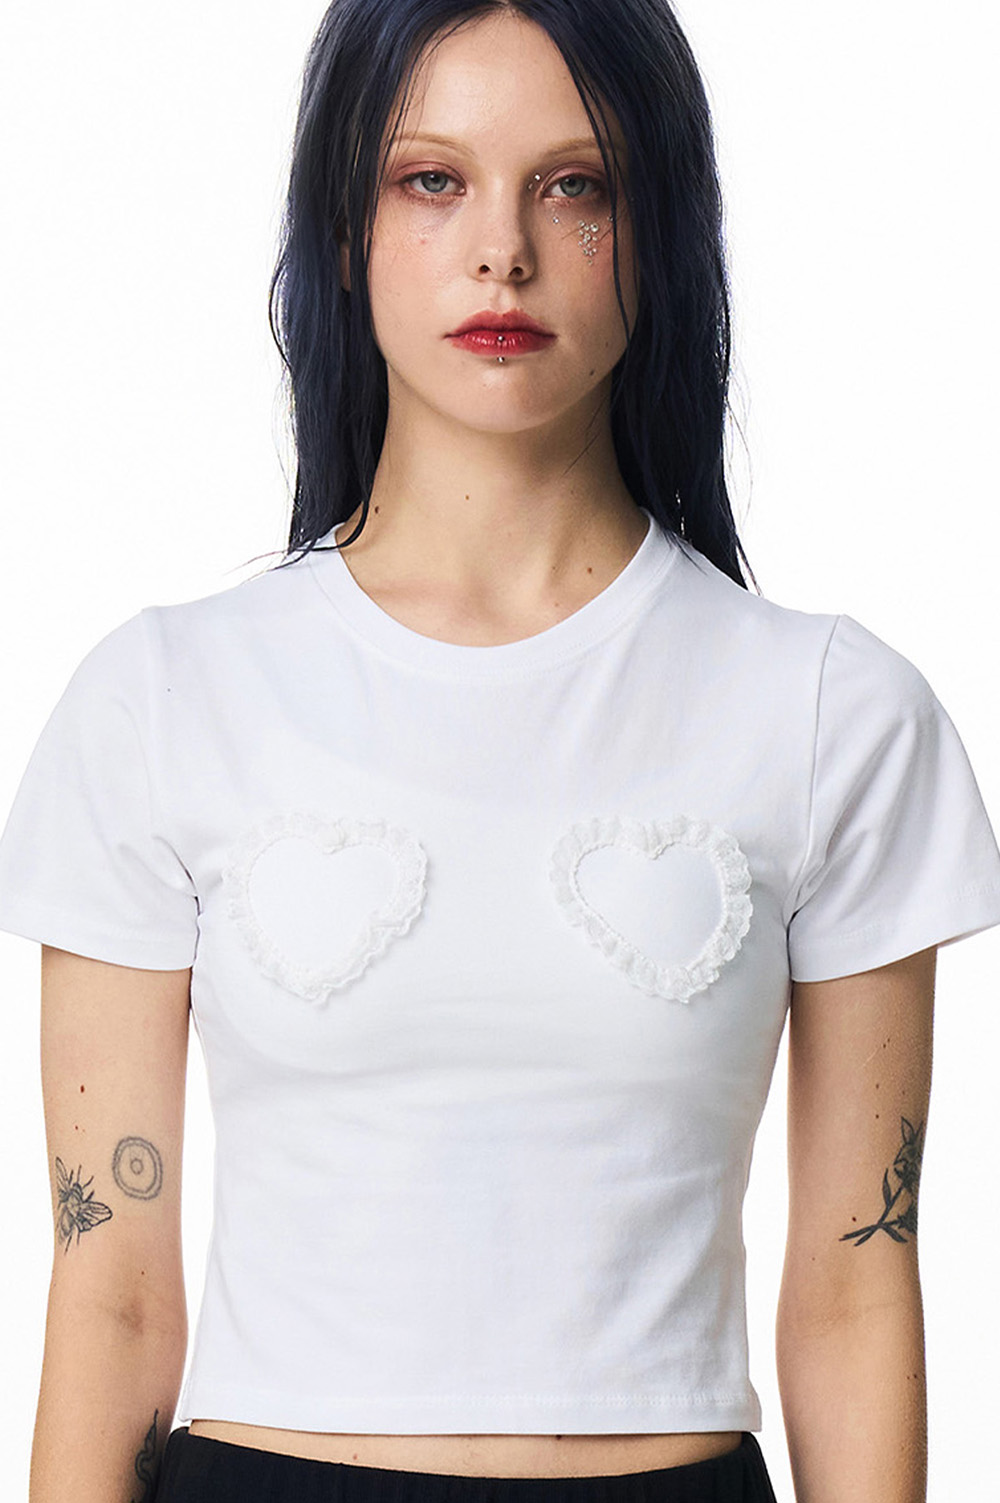 Heart lace fit cropped T-shirt white